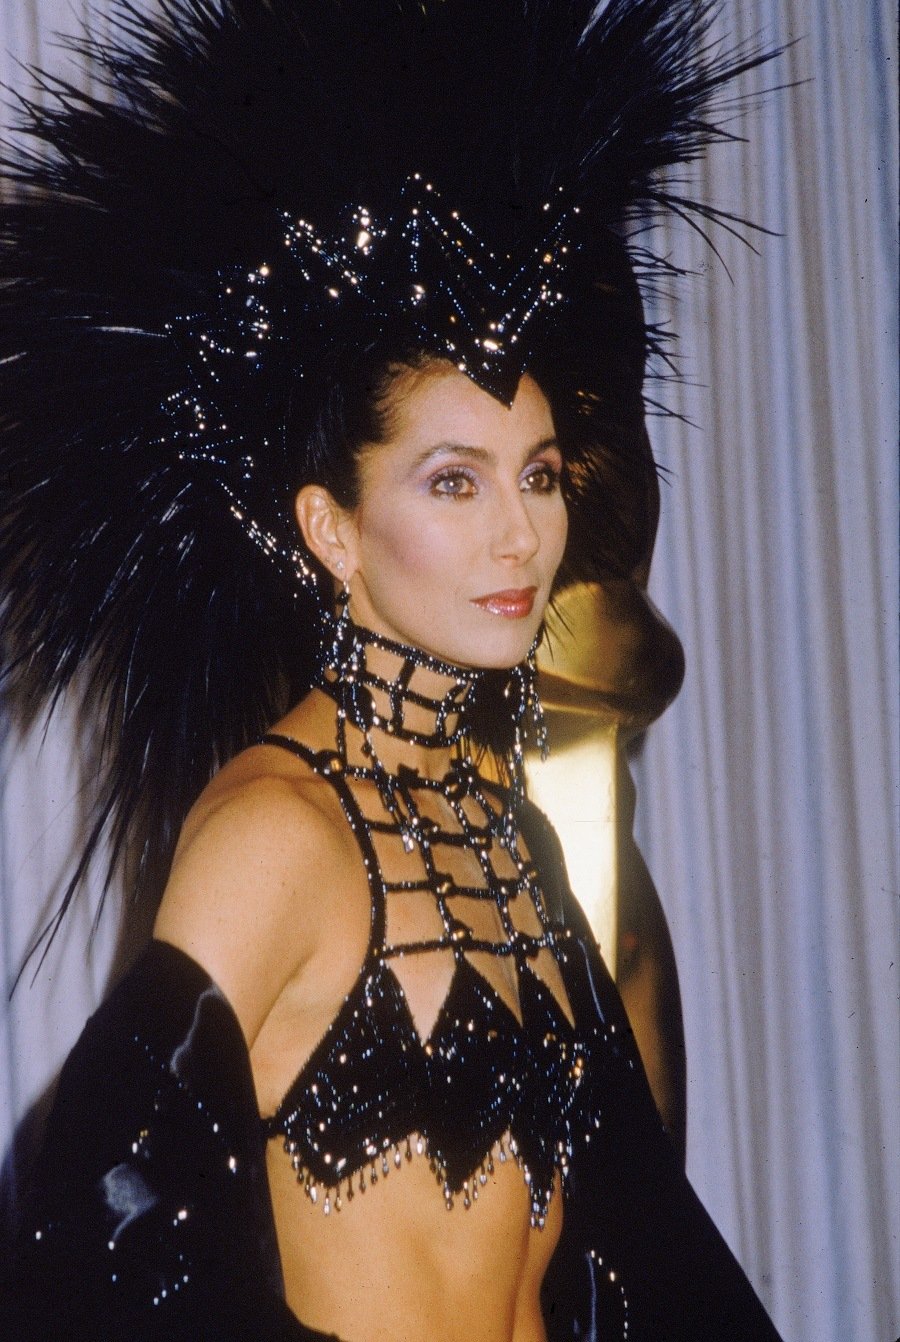 American actor and singer Cher attends the Academy Awards ceremony